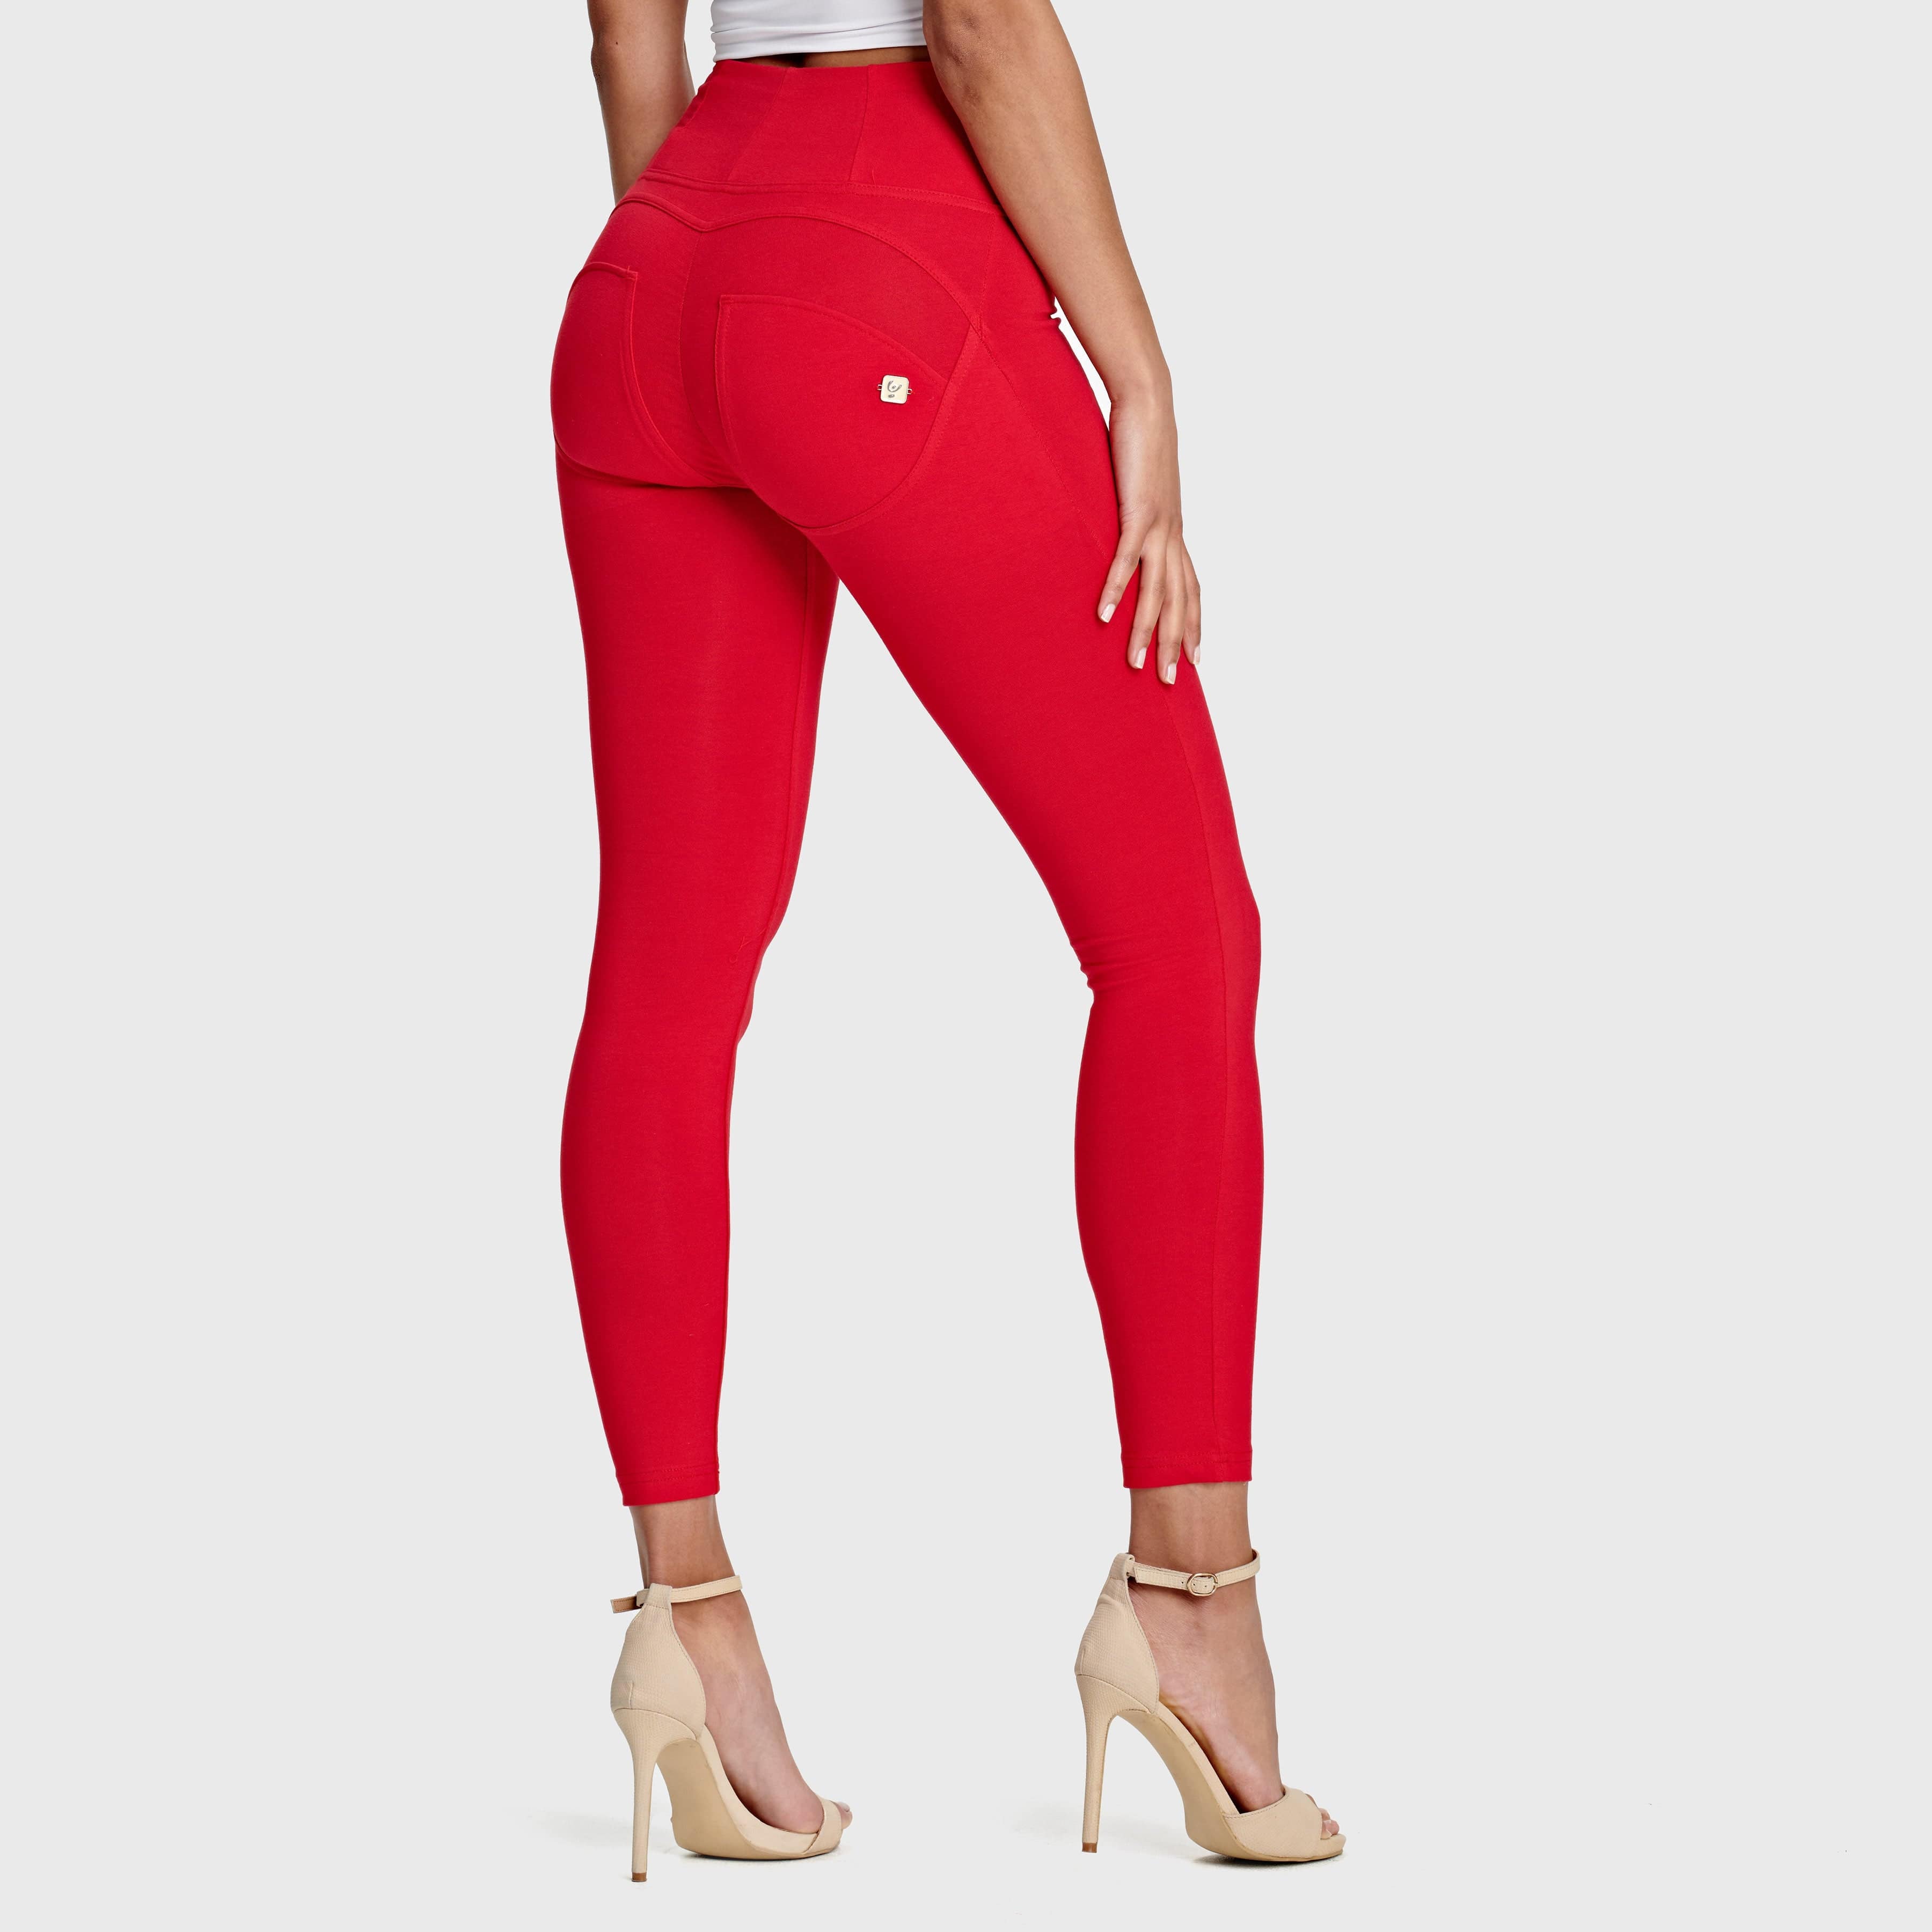 WR.UP® Fashion - High Waisted - 7/8 Length - Red 1